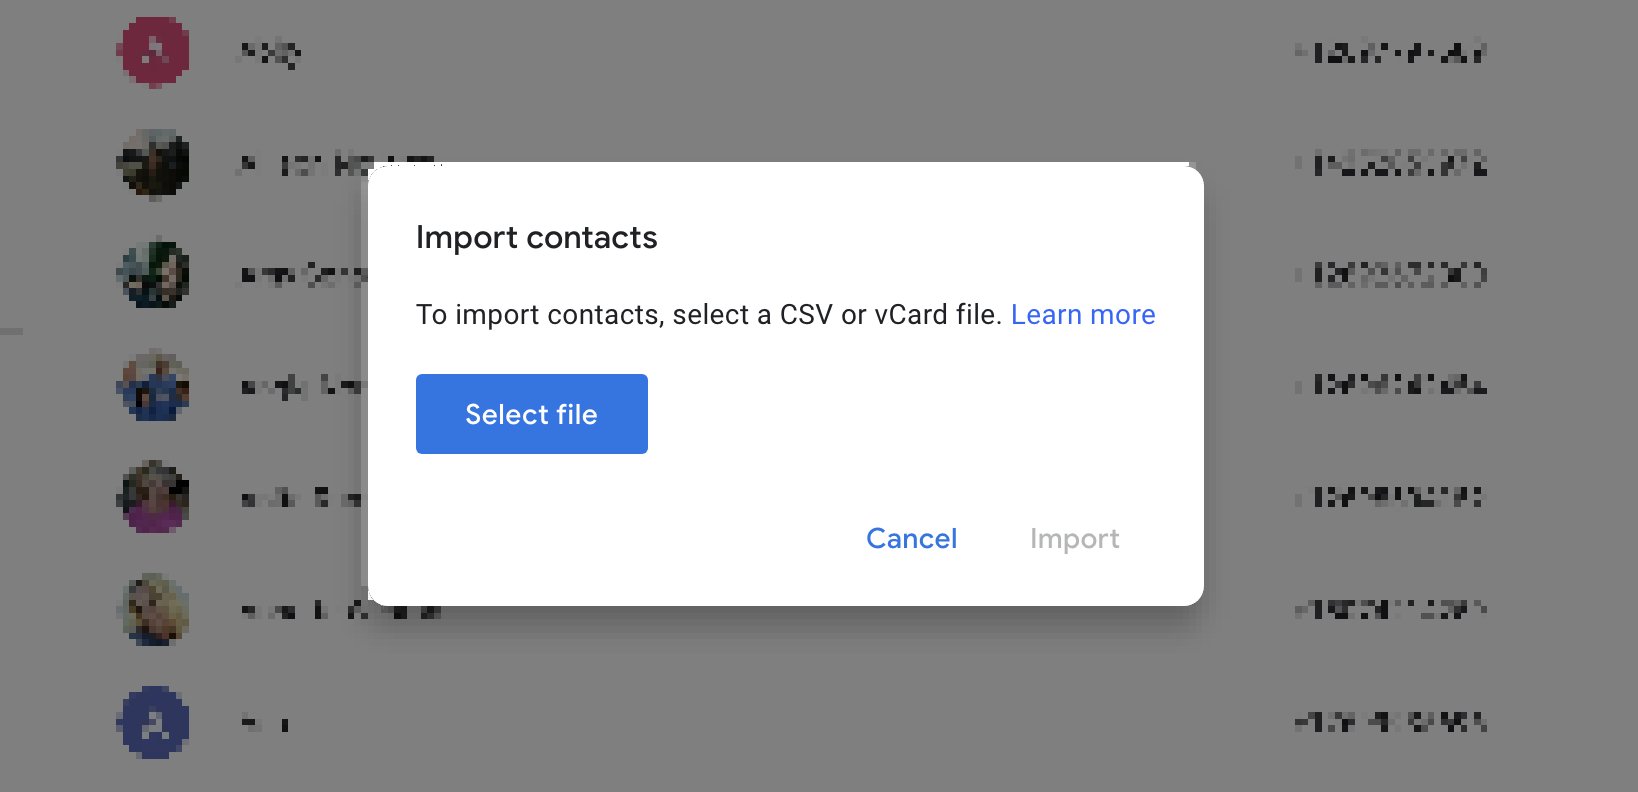 Google Contacts 